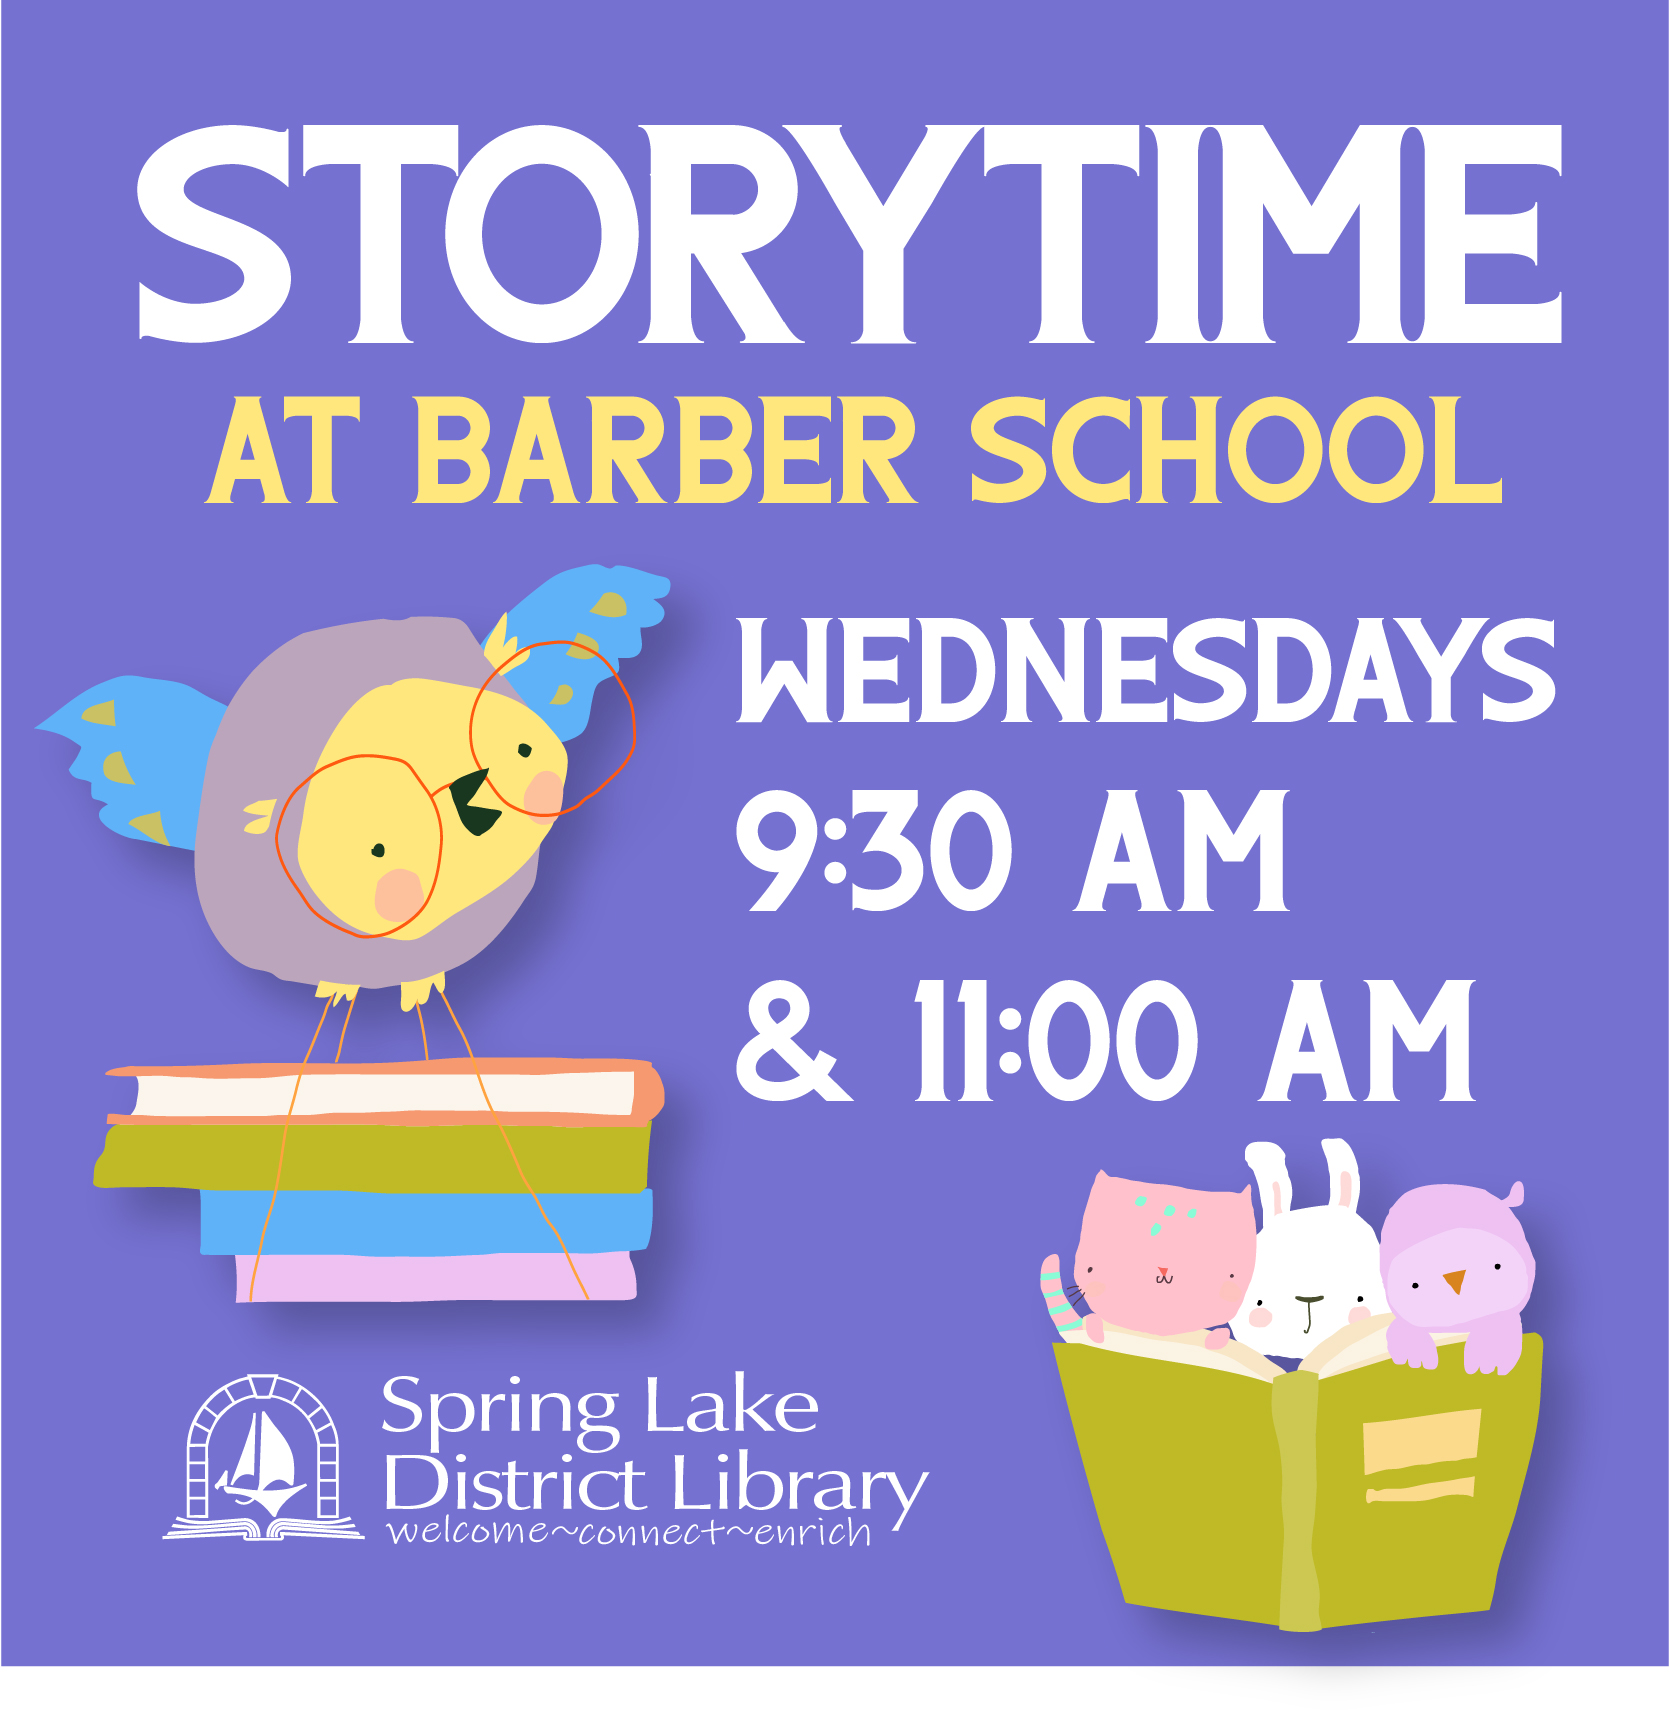 Storytime at Barber School